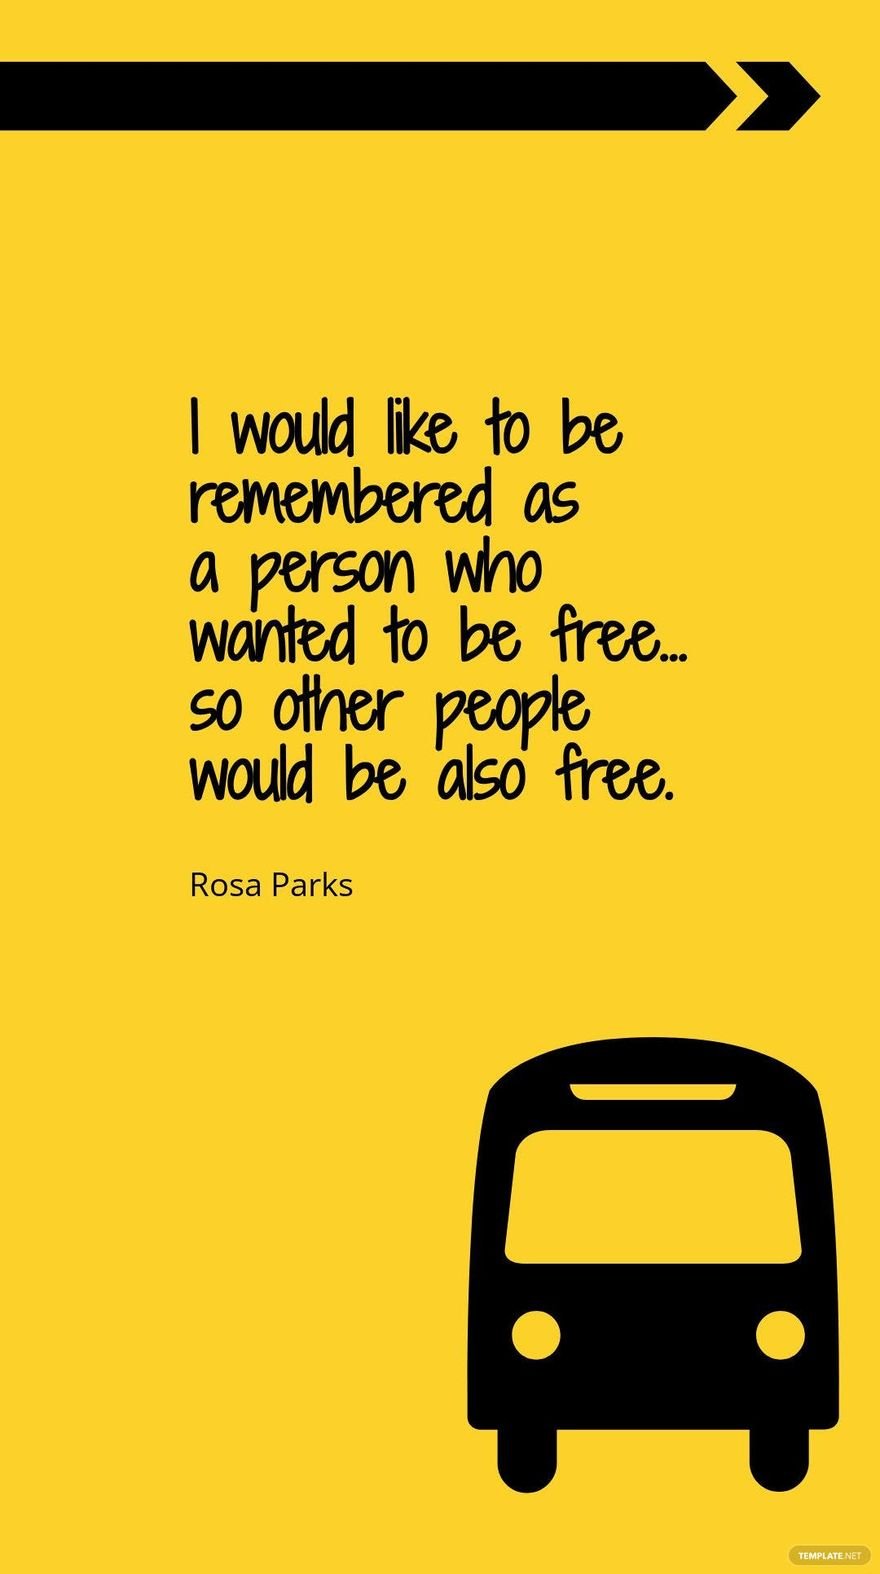 Rosa Parks - I would like to be remembered as a person who wanted to be free… so other people would be also free.